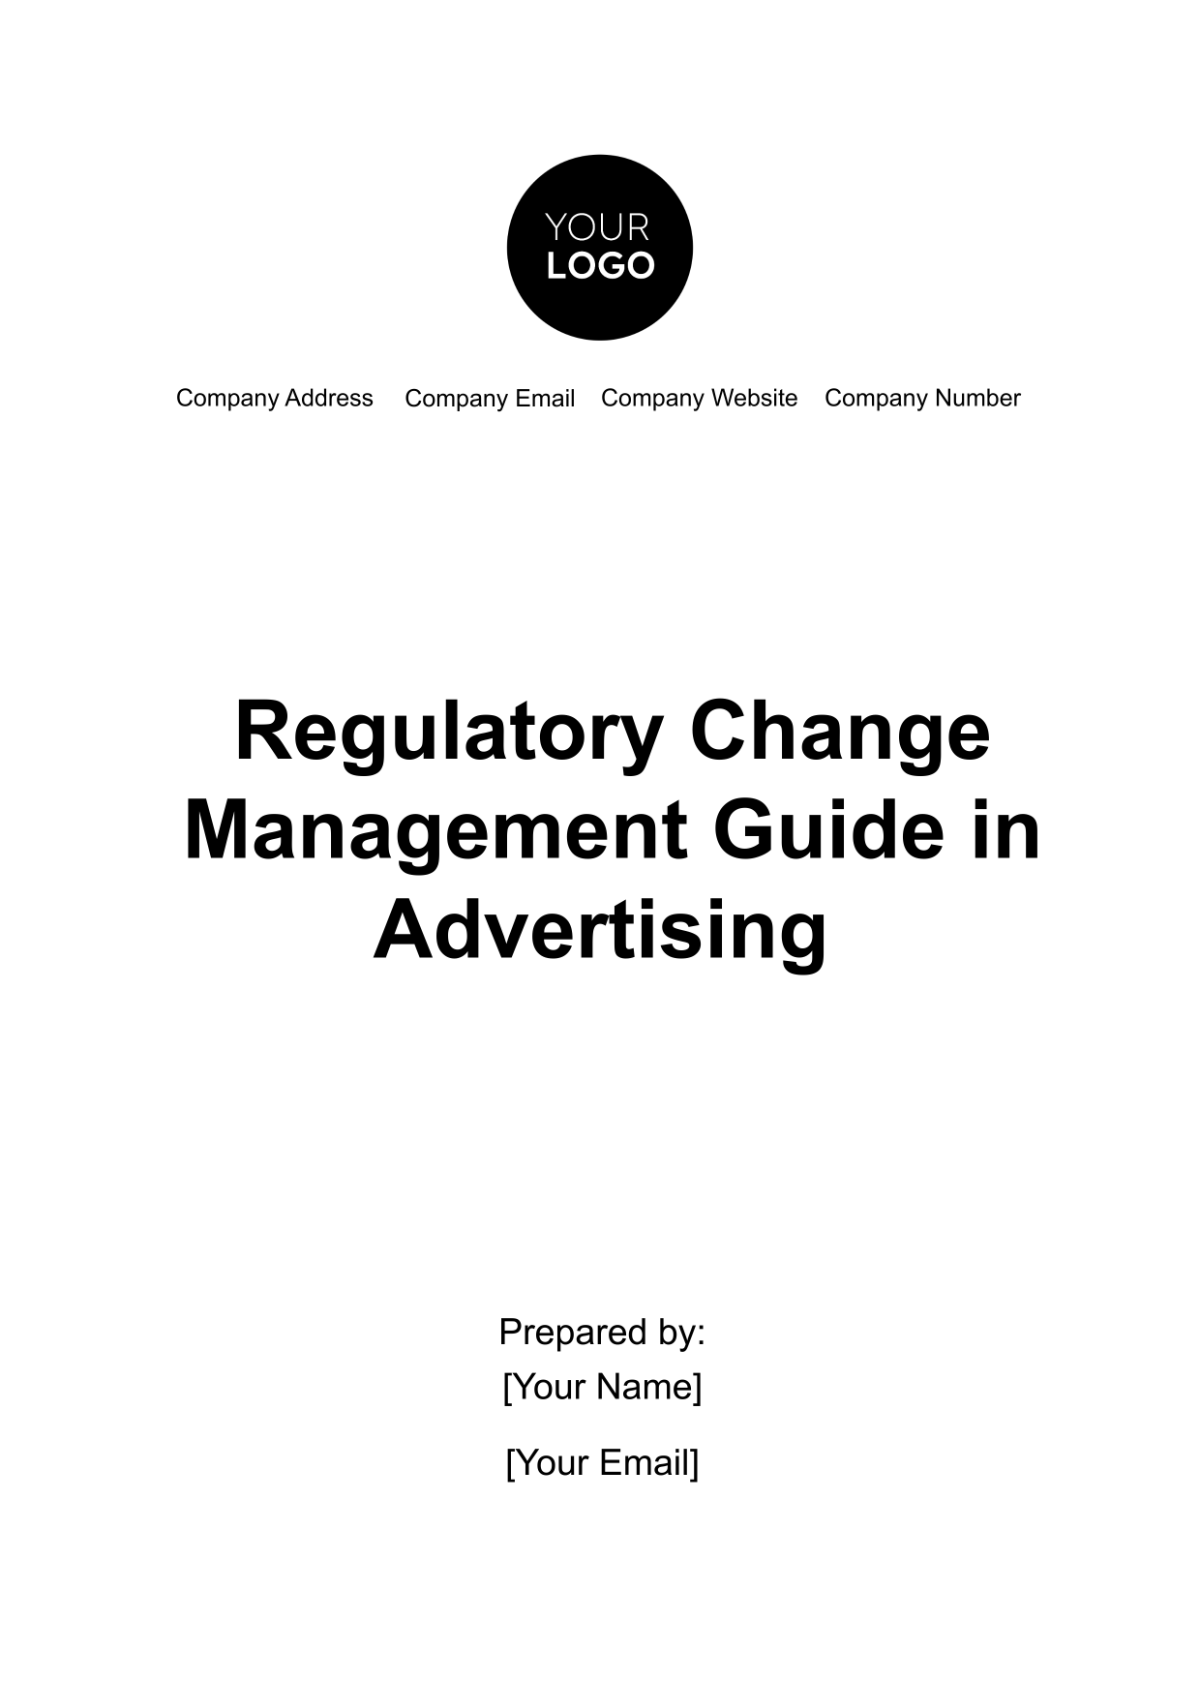 Regulatory Change Management Guide in Advertising Template